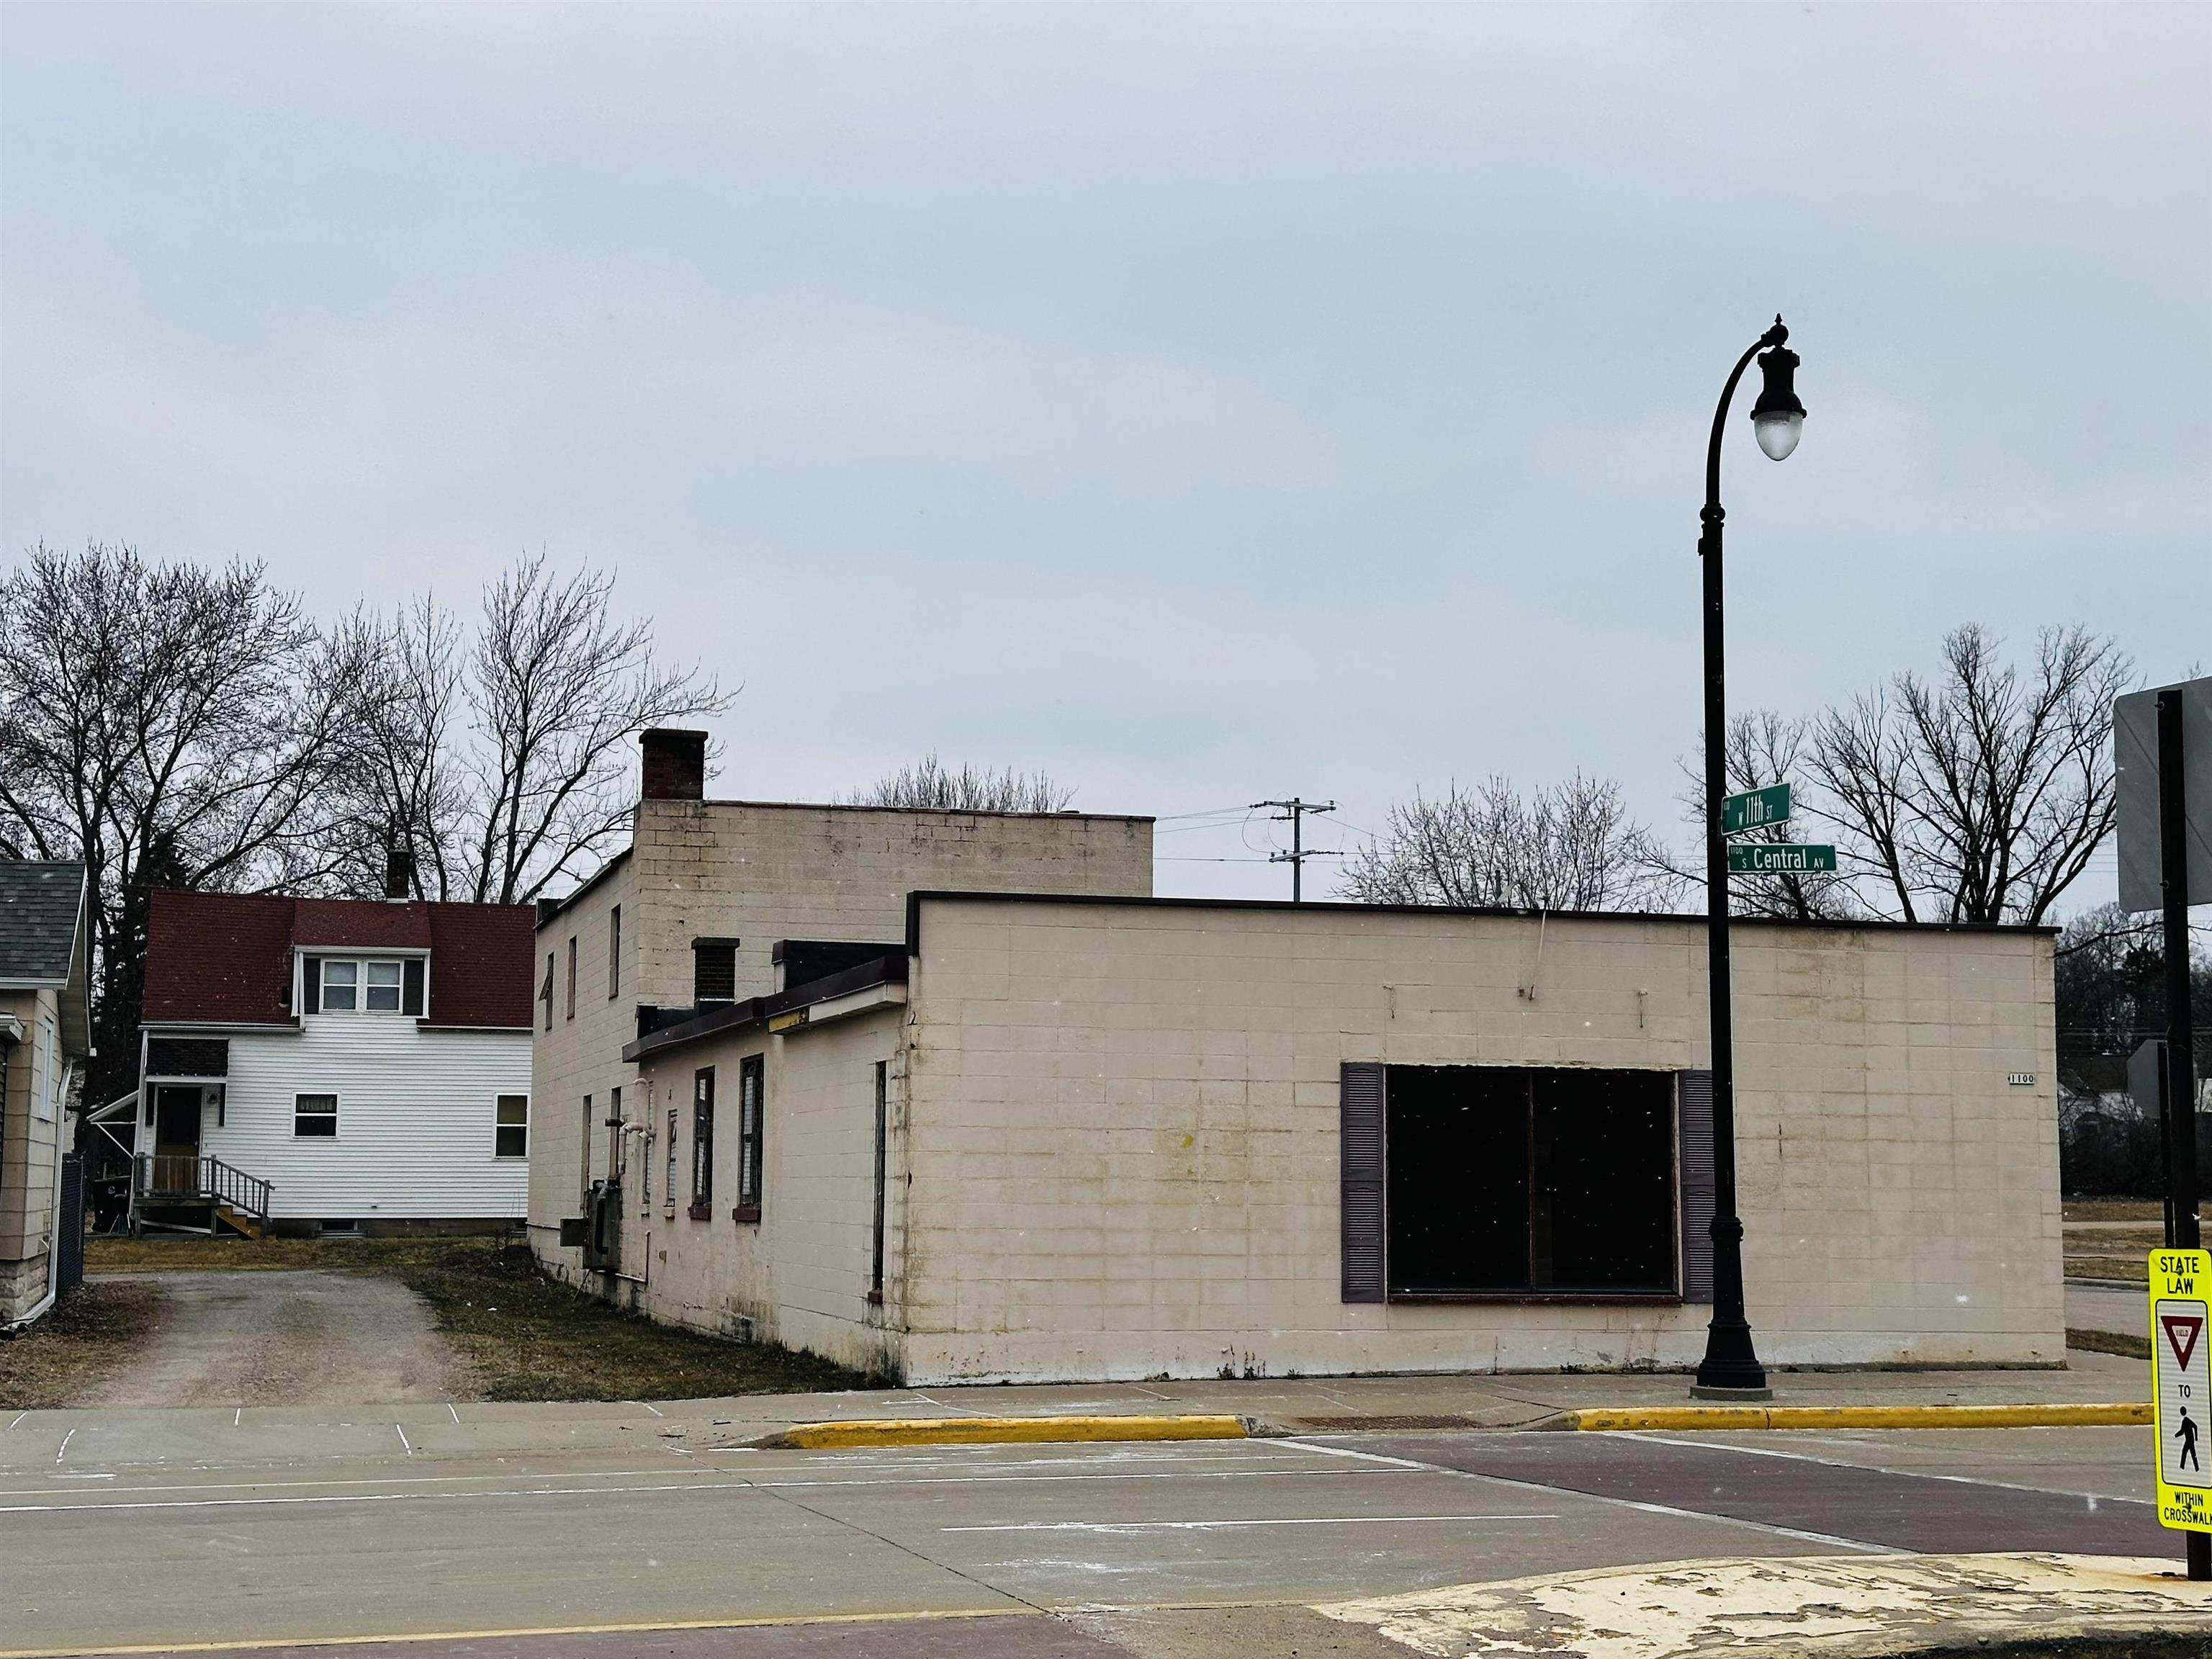 1100 S CENTRAL AVENUE, Marshfield, Wisconsin 54449, ,Commercial/industrial,For Sale,1100 S CENTRAL AVENUE,22400903